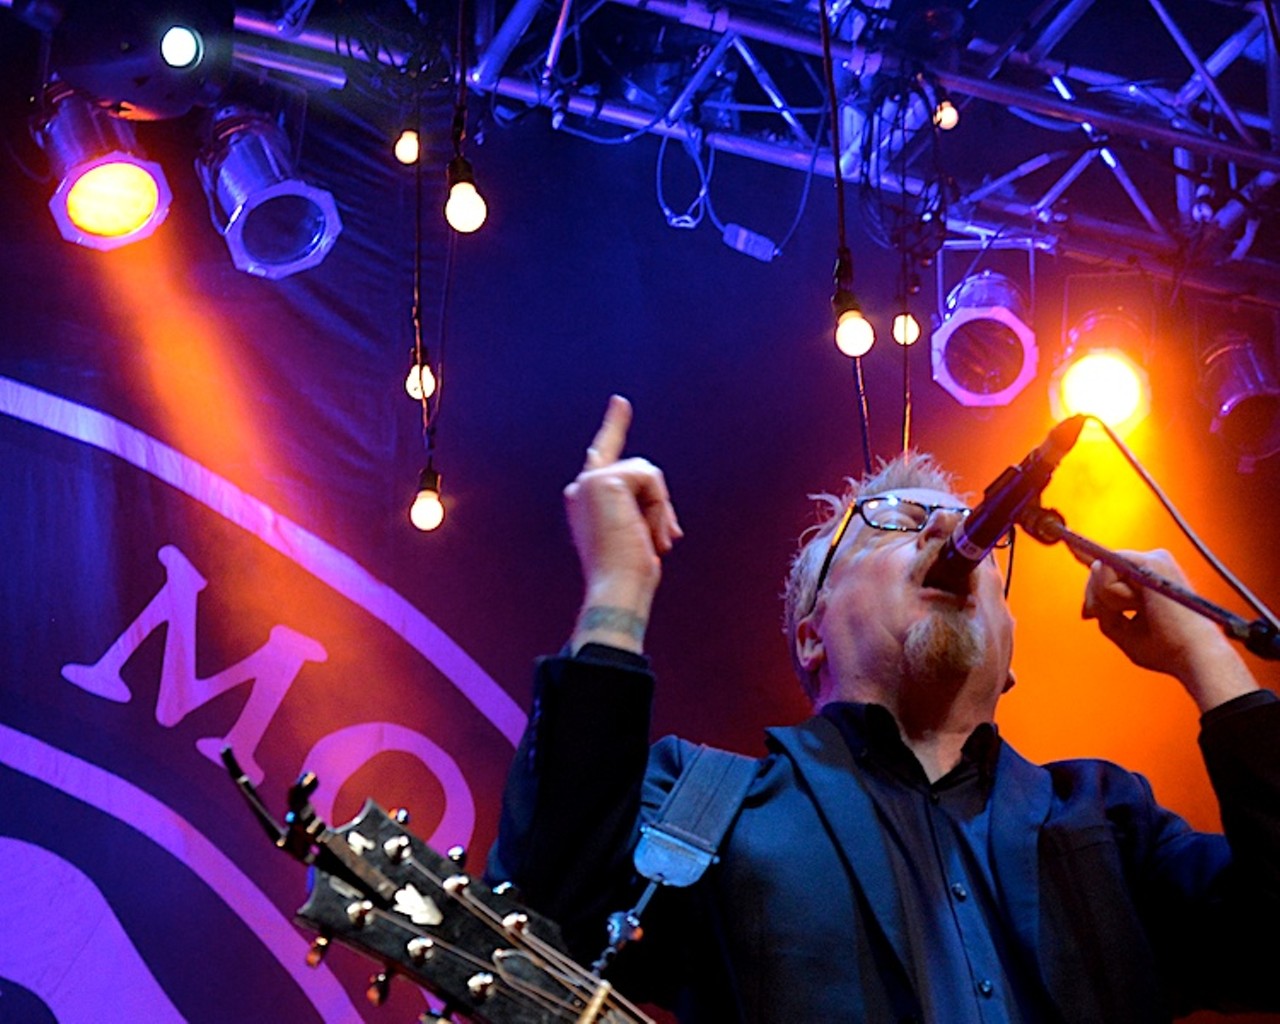 Flogging Molly performing at House of Blues